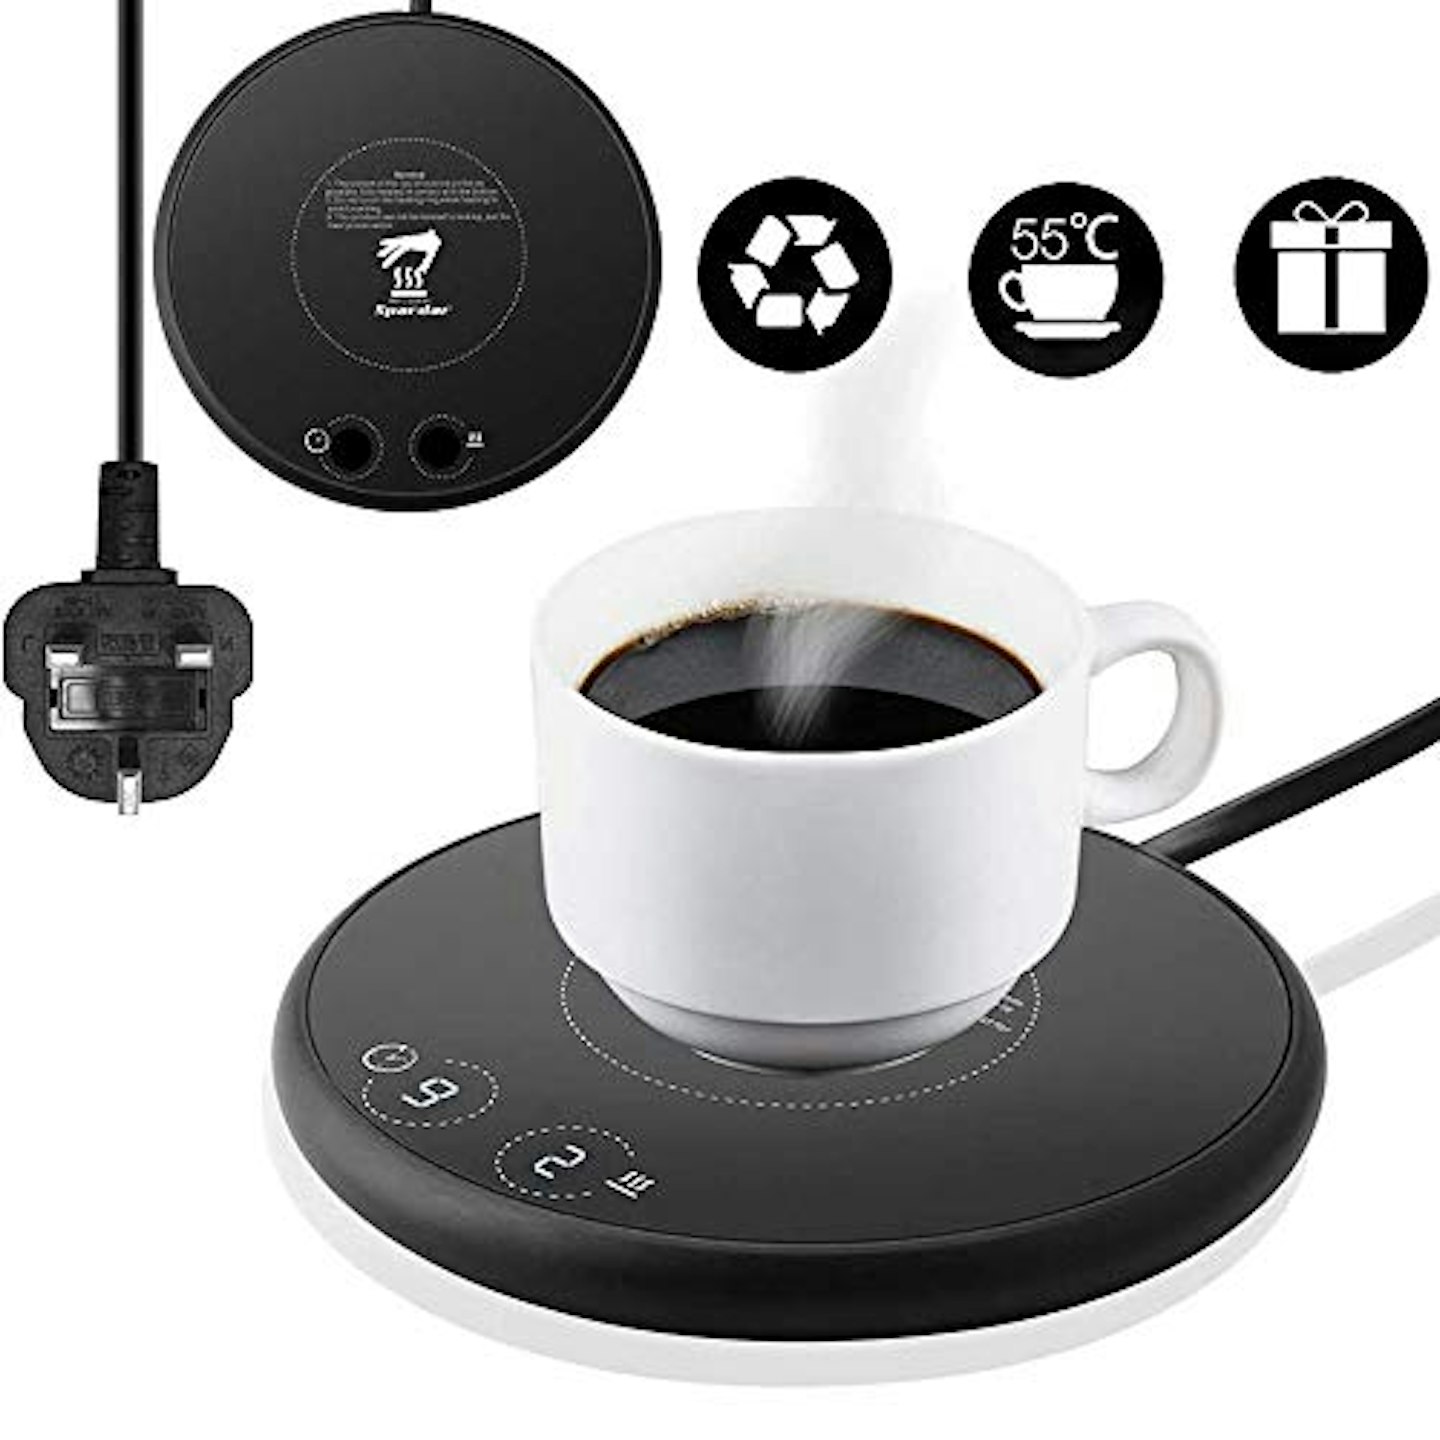 Hot Cookie USB Cup Warmer - Keep Your Hot Beverage Warm With This